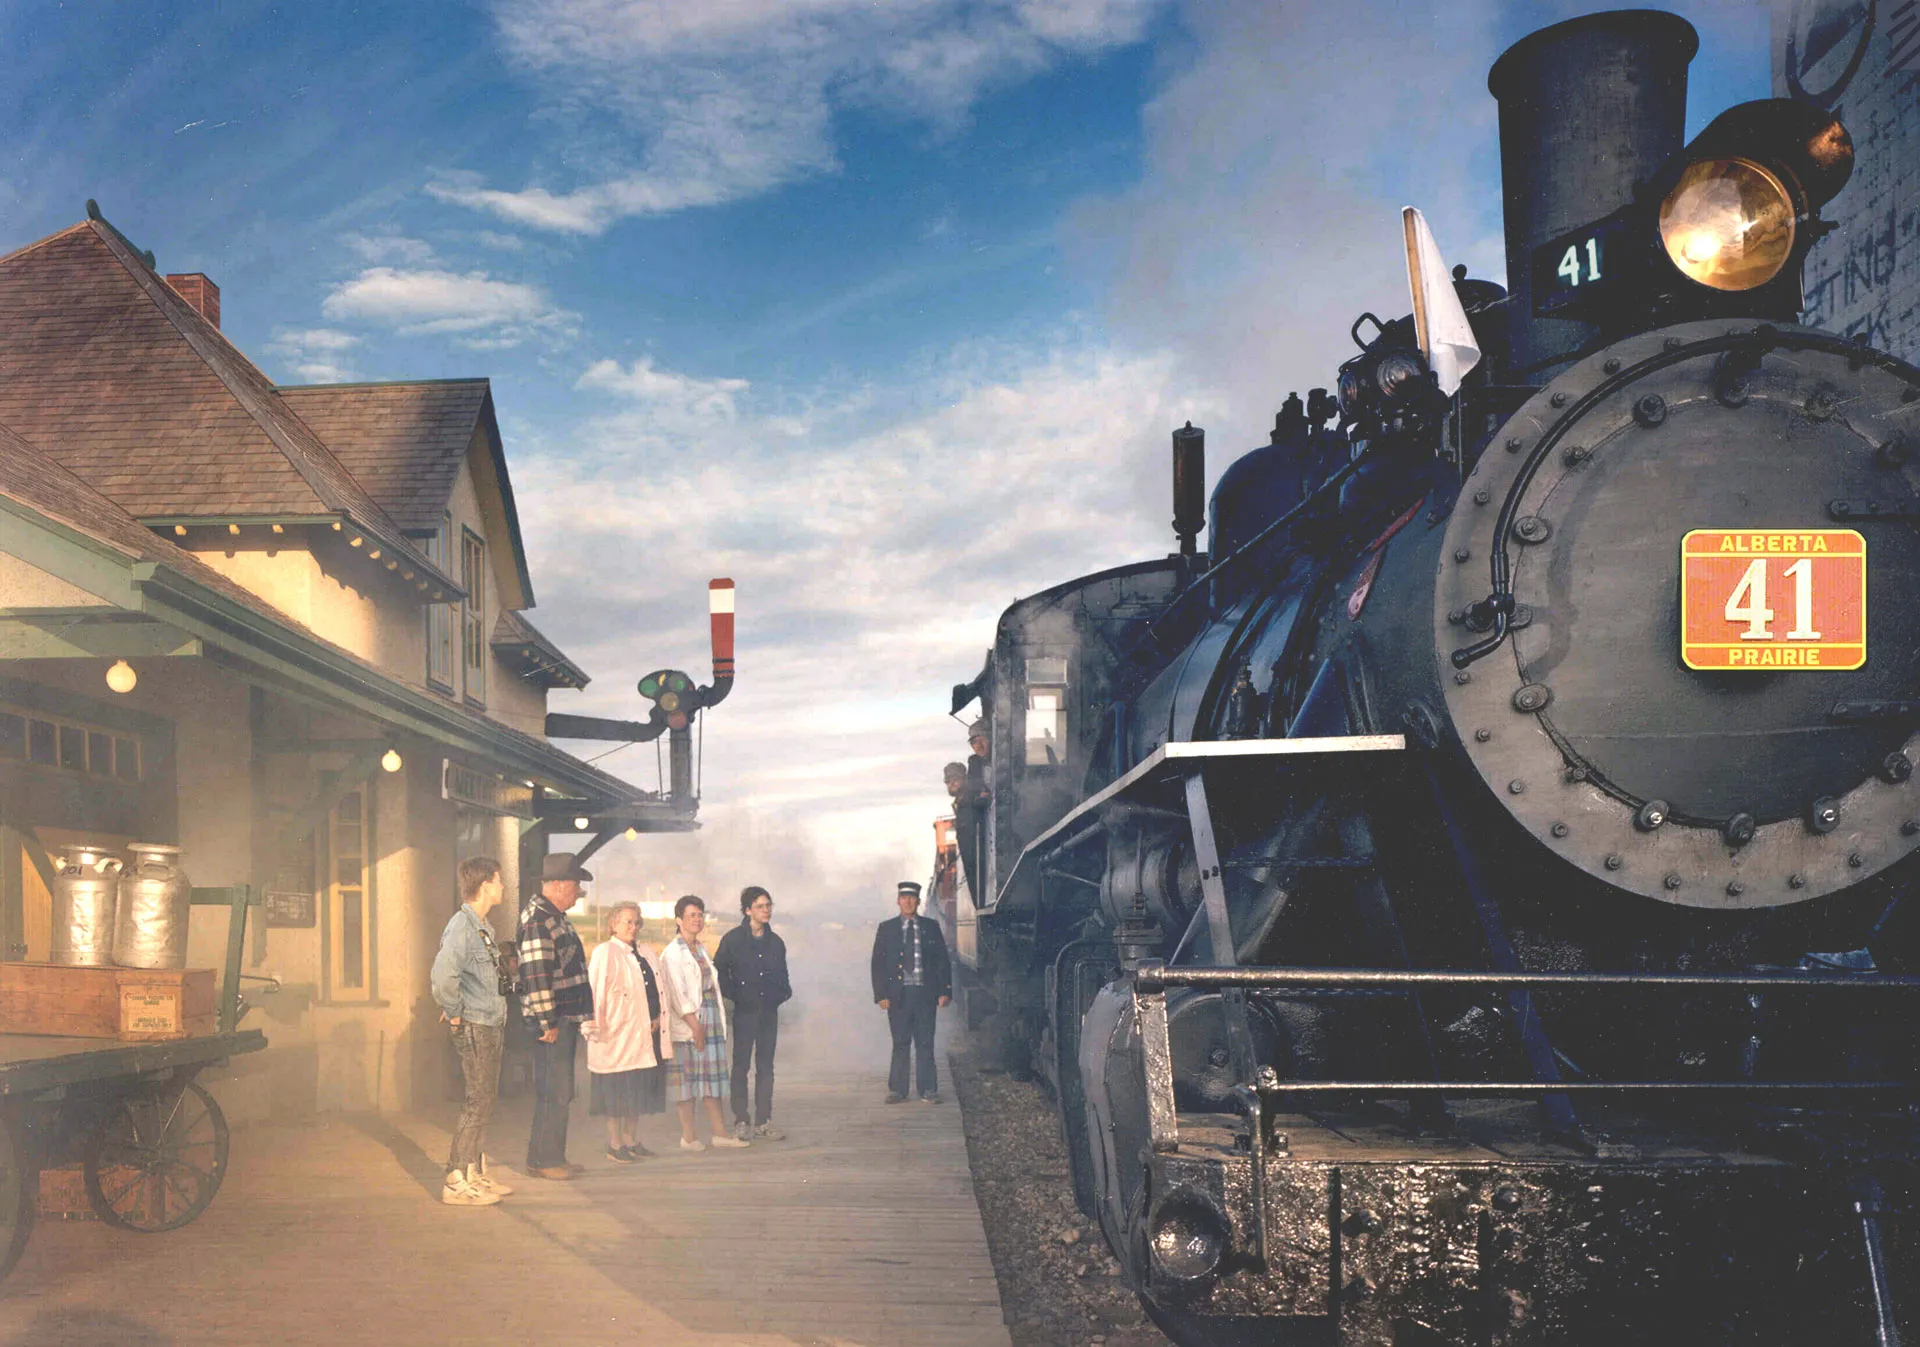 Alberta Prairie Railway Excursions are a great day trip outside of Calgary